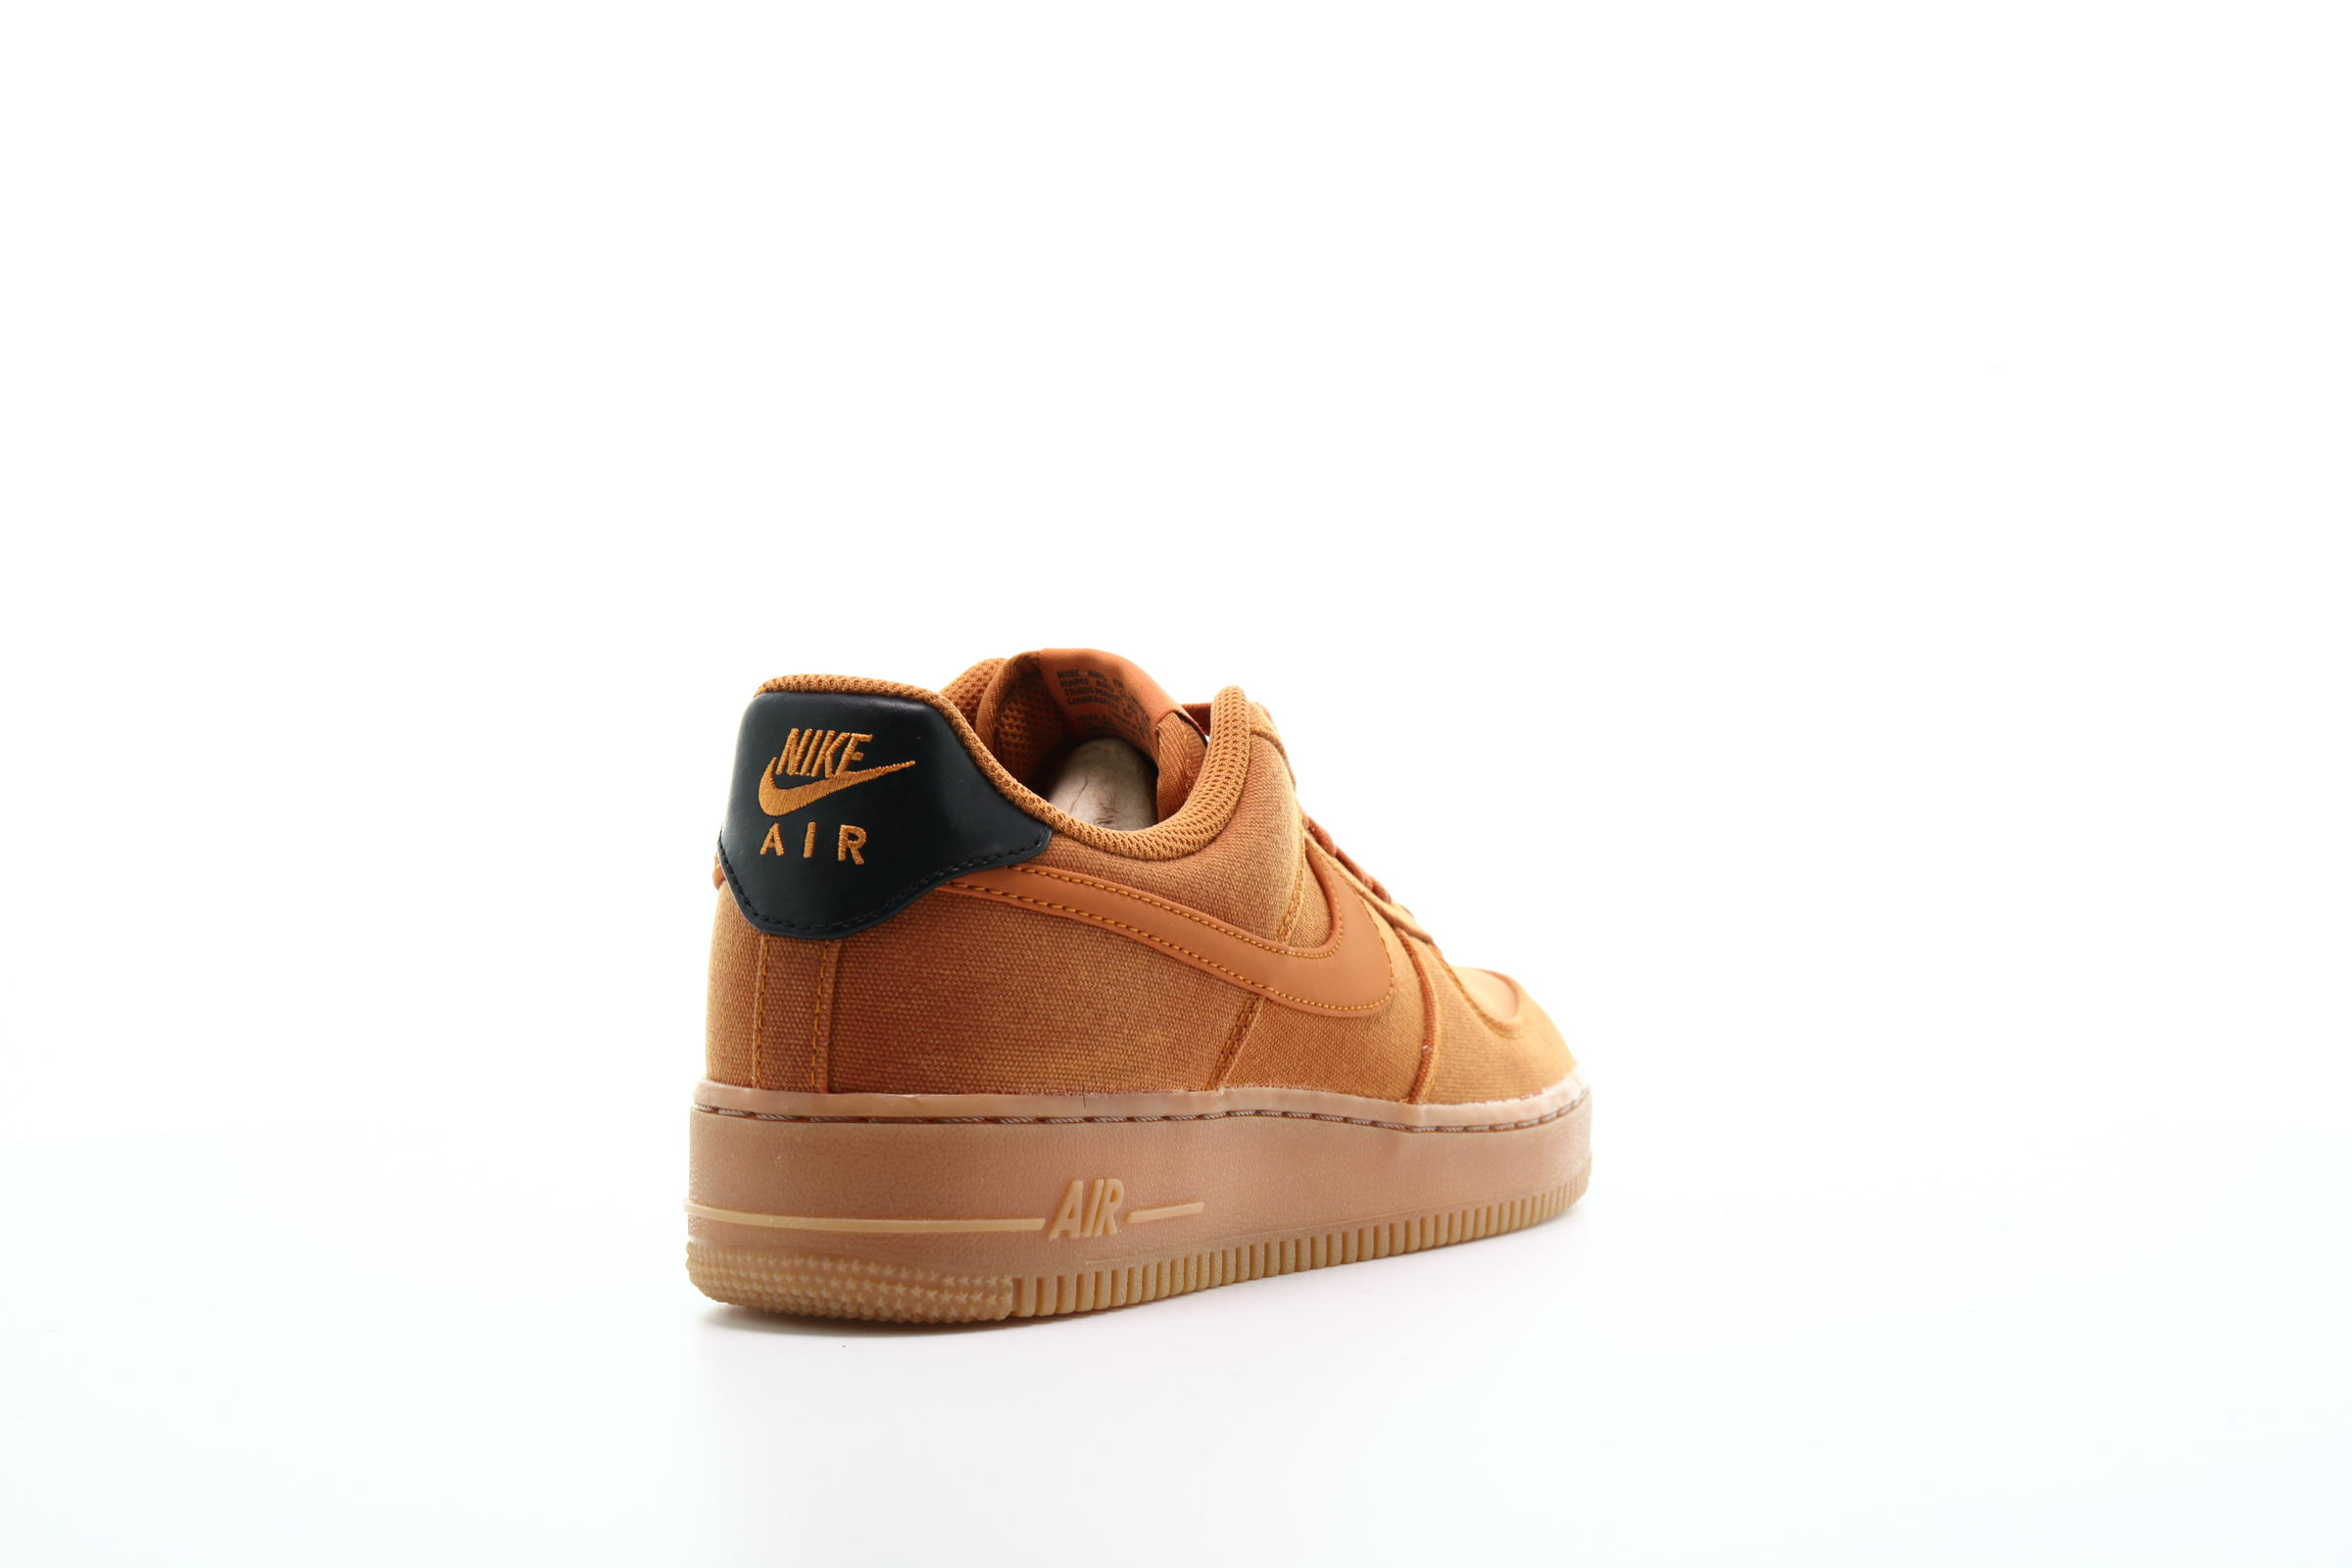 Nike Air Force 1 '07 Lv8 Style "Monarch"